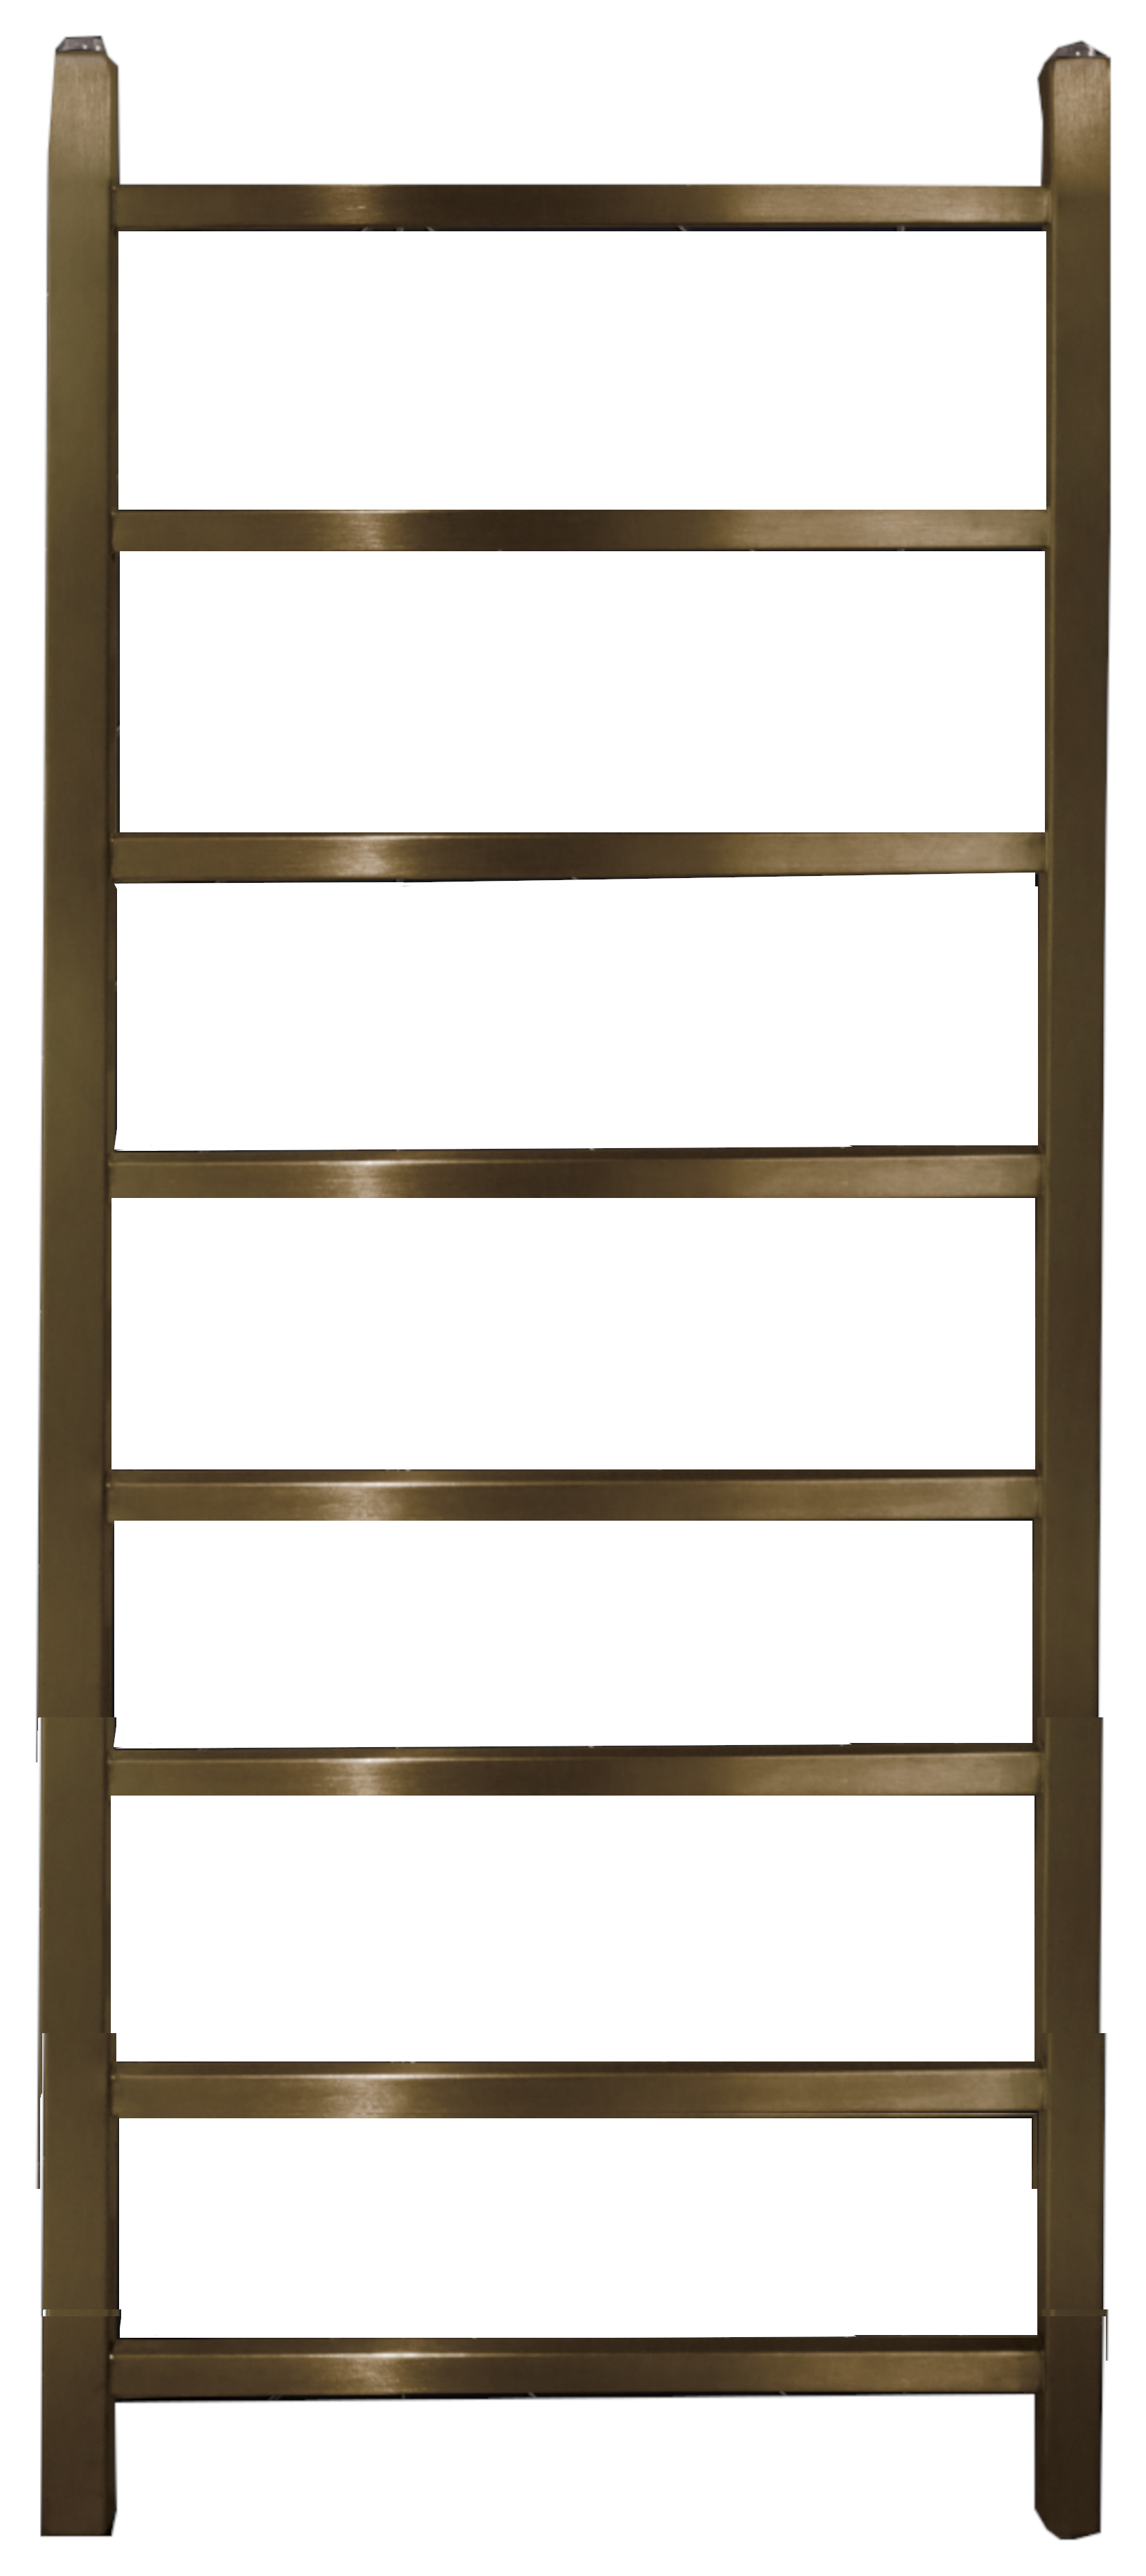 Image of Towelrads Diva Brushed Brass Dry Electric Non Thermostatic Towel Radiator - 1200 x 500mm